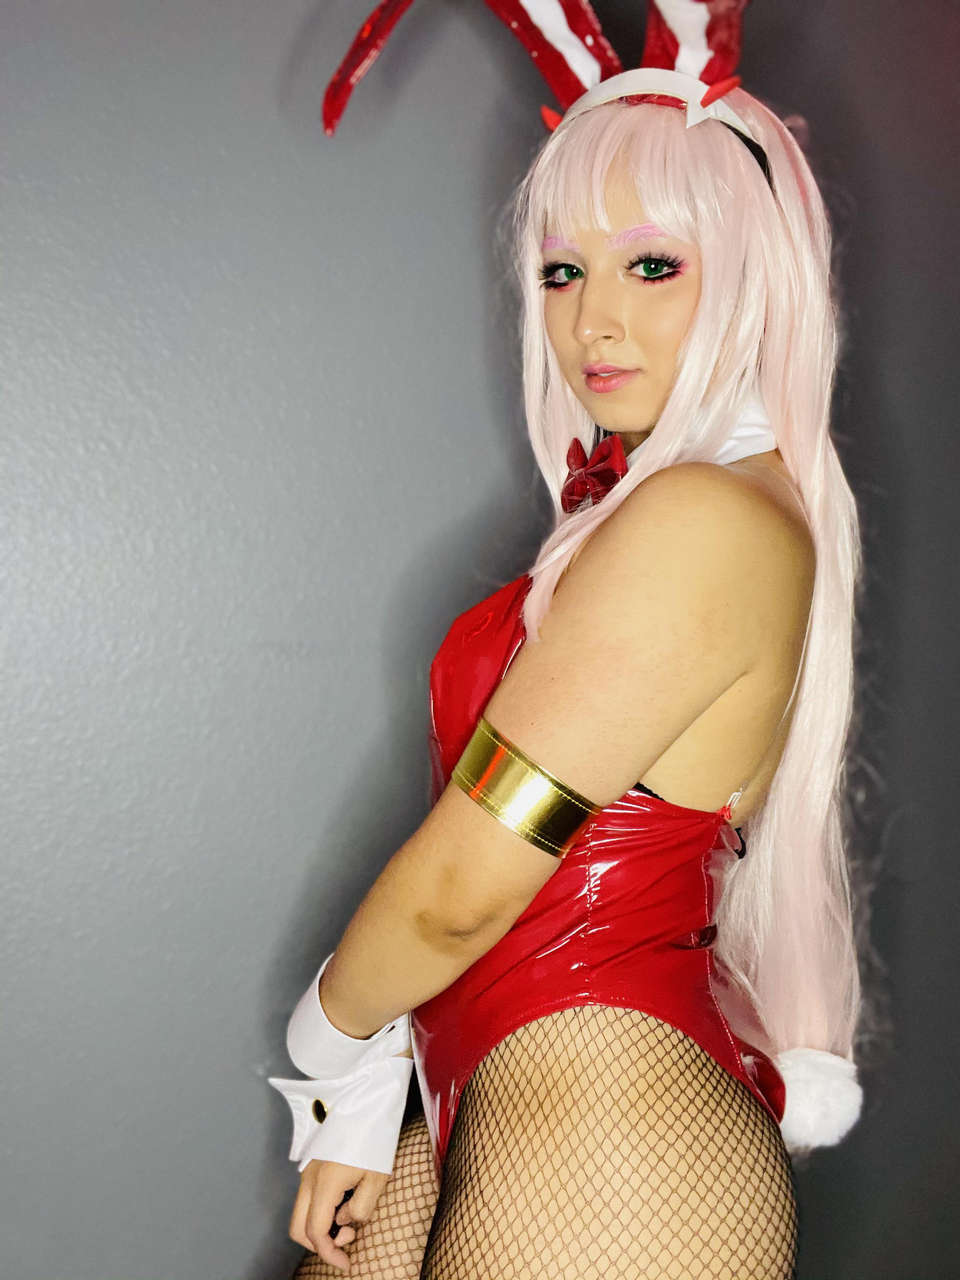 Zerotwo Cosplay By Selena The Latina Self